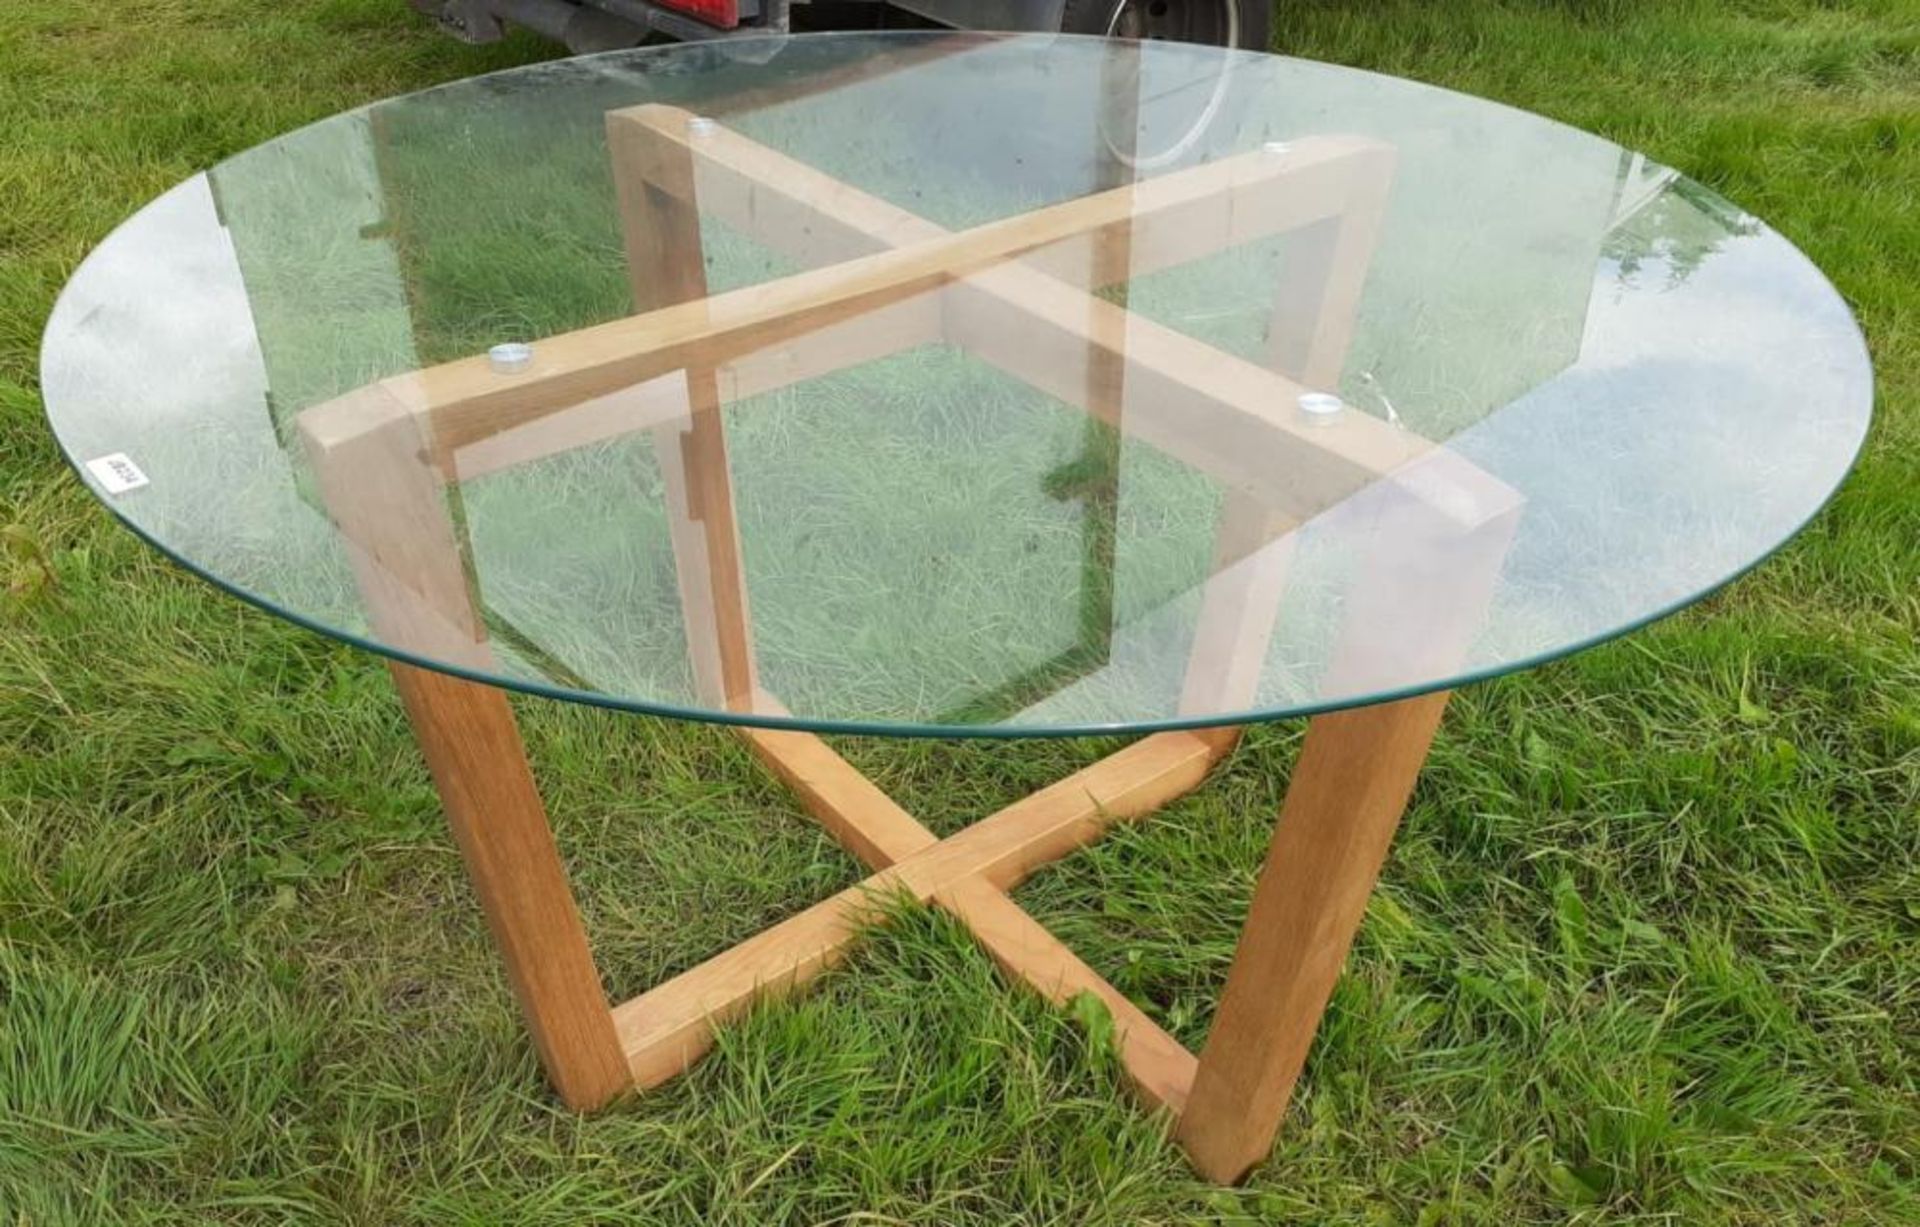 1 x Contemporary Round Glass Topped Dining Table and Wood Base - Dimensions: Top Diameter 135cm x - Image 3 of 4